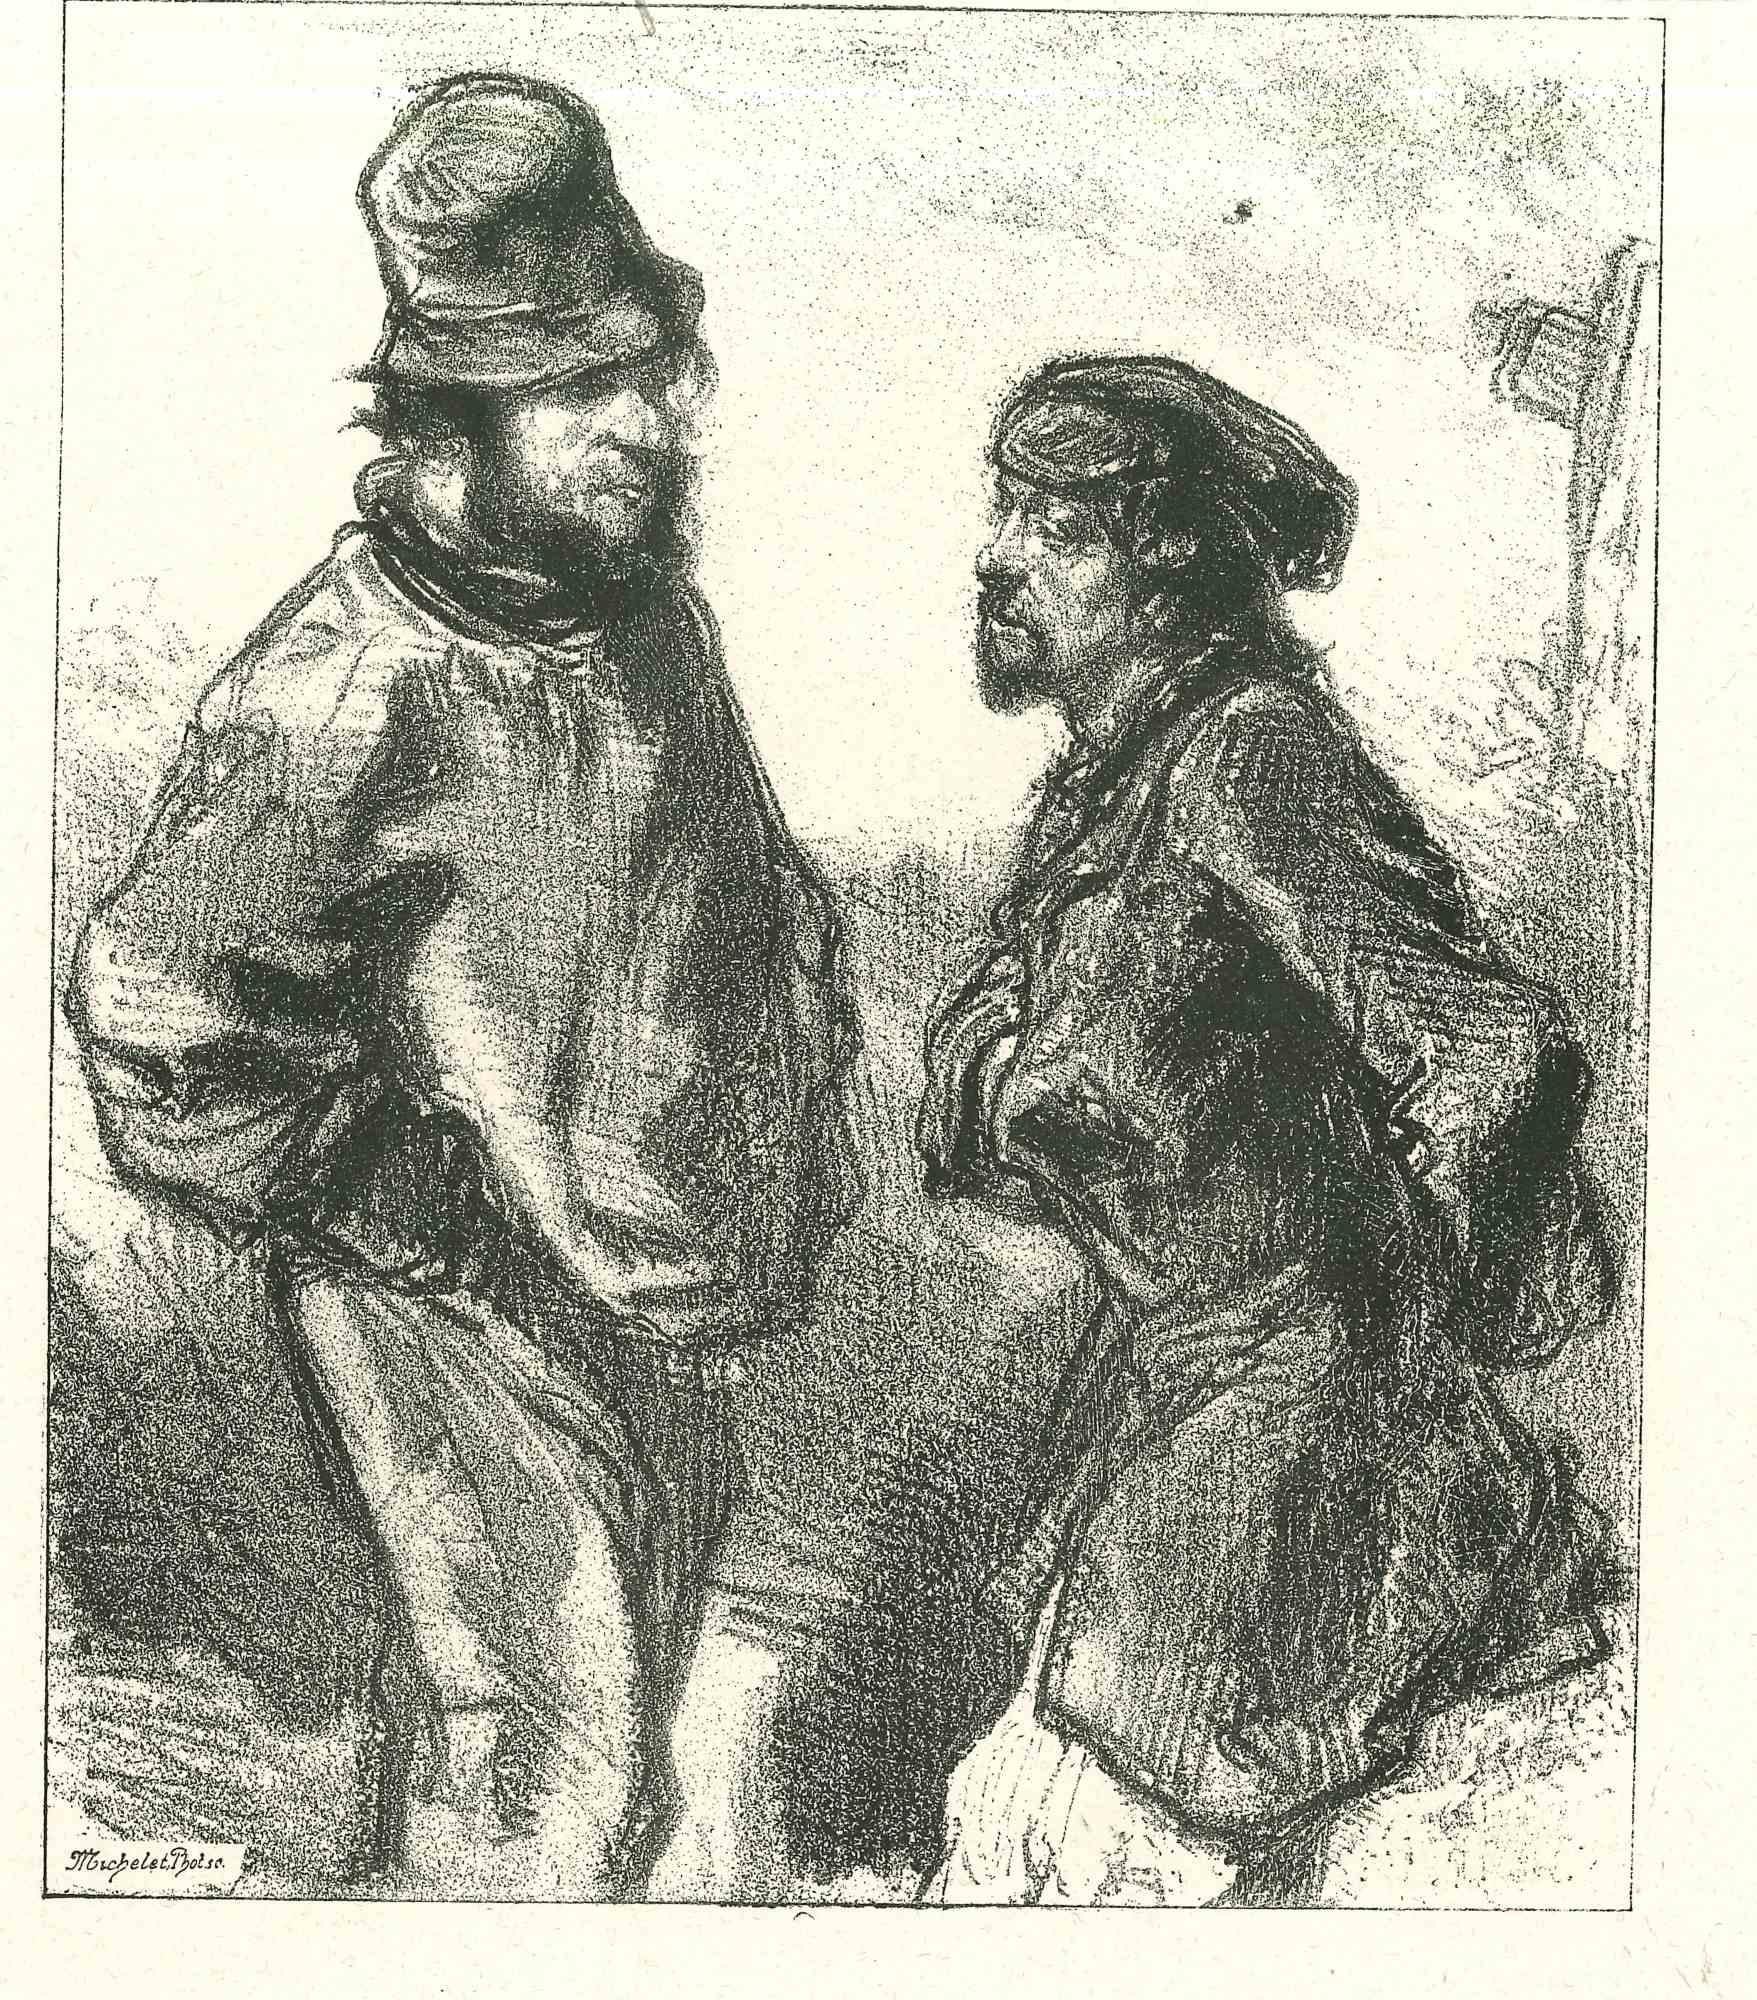 Two men is an original lithograph artwork on ivory-colored paper, realized by the French draftsman Paul Gavarni (after) (alias Guillaume Sulpice Chevalier Gavarni, 1804-1866) in Paris, 1881, in the collection of Illustrations for "La Mascarade